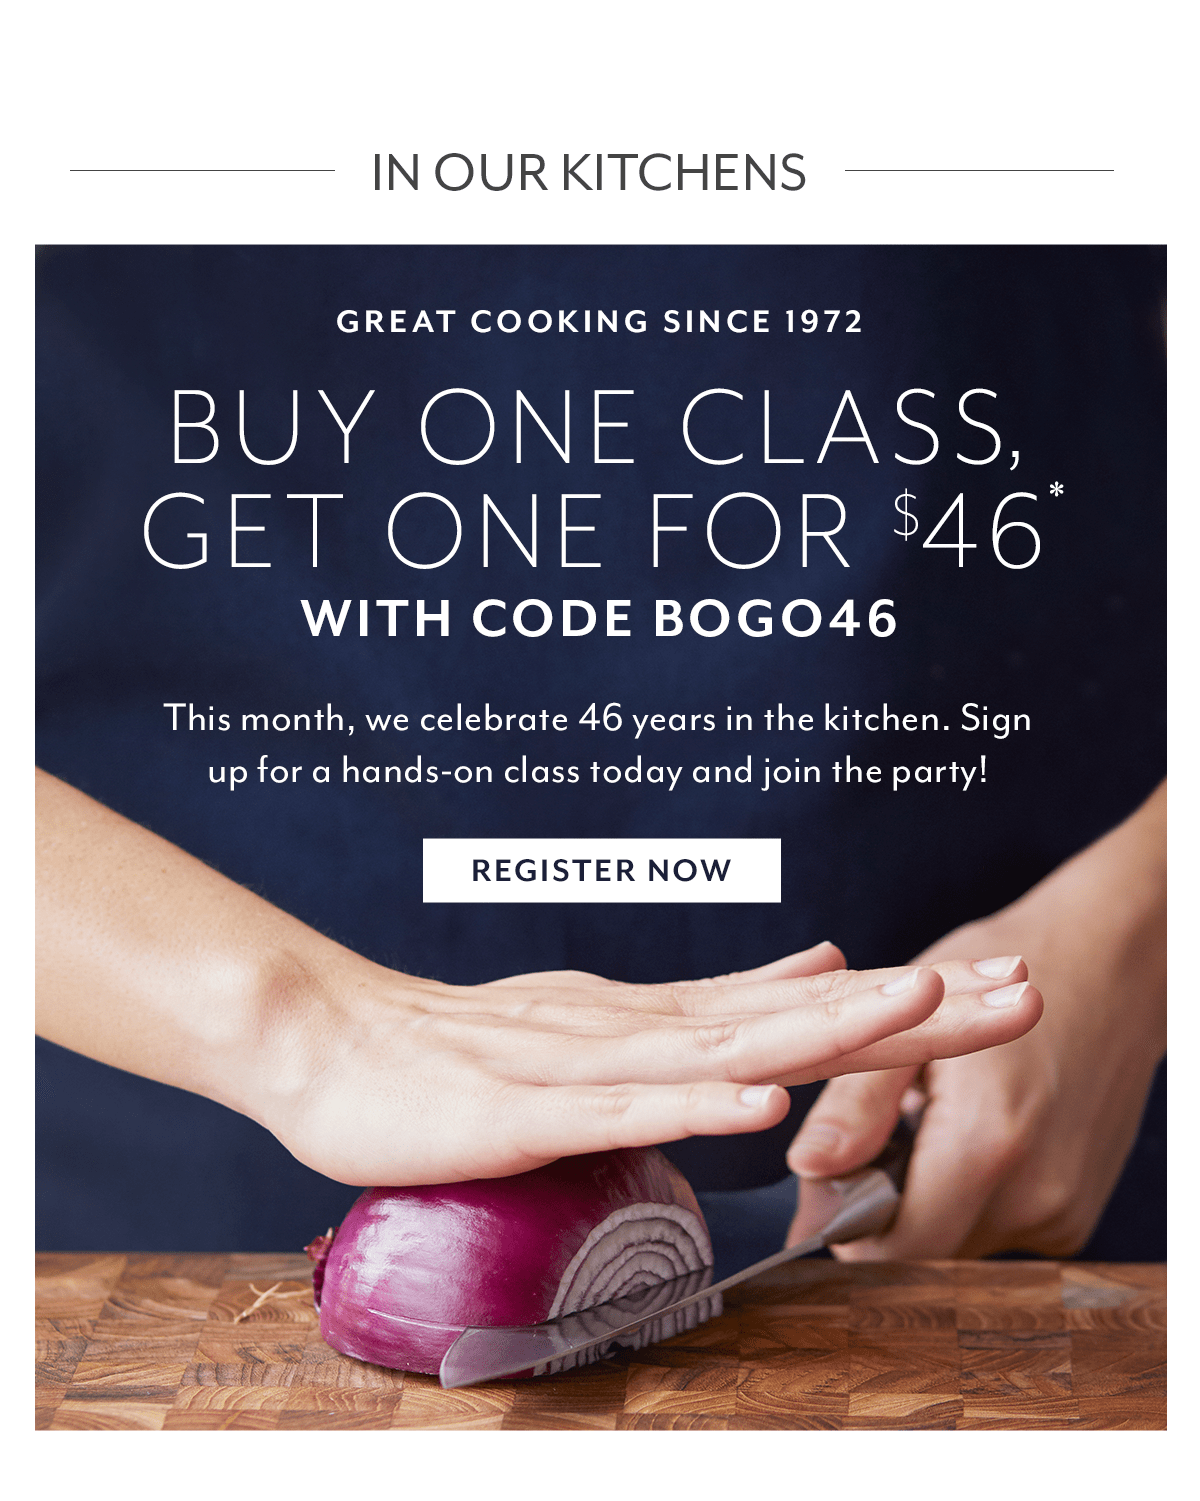 Buy One Class, Get One for $46